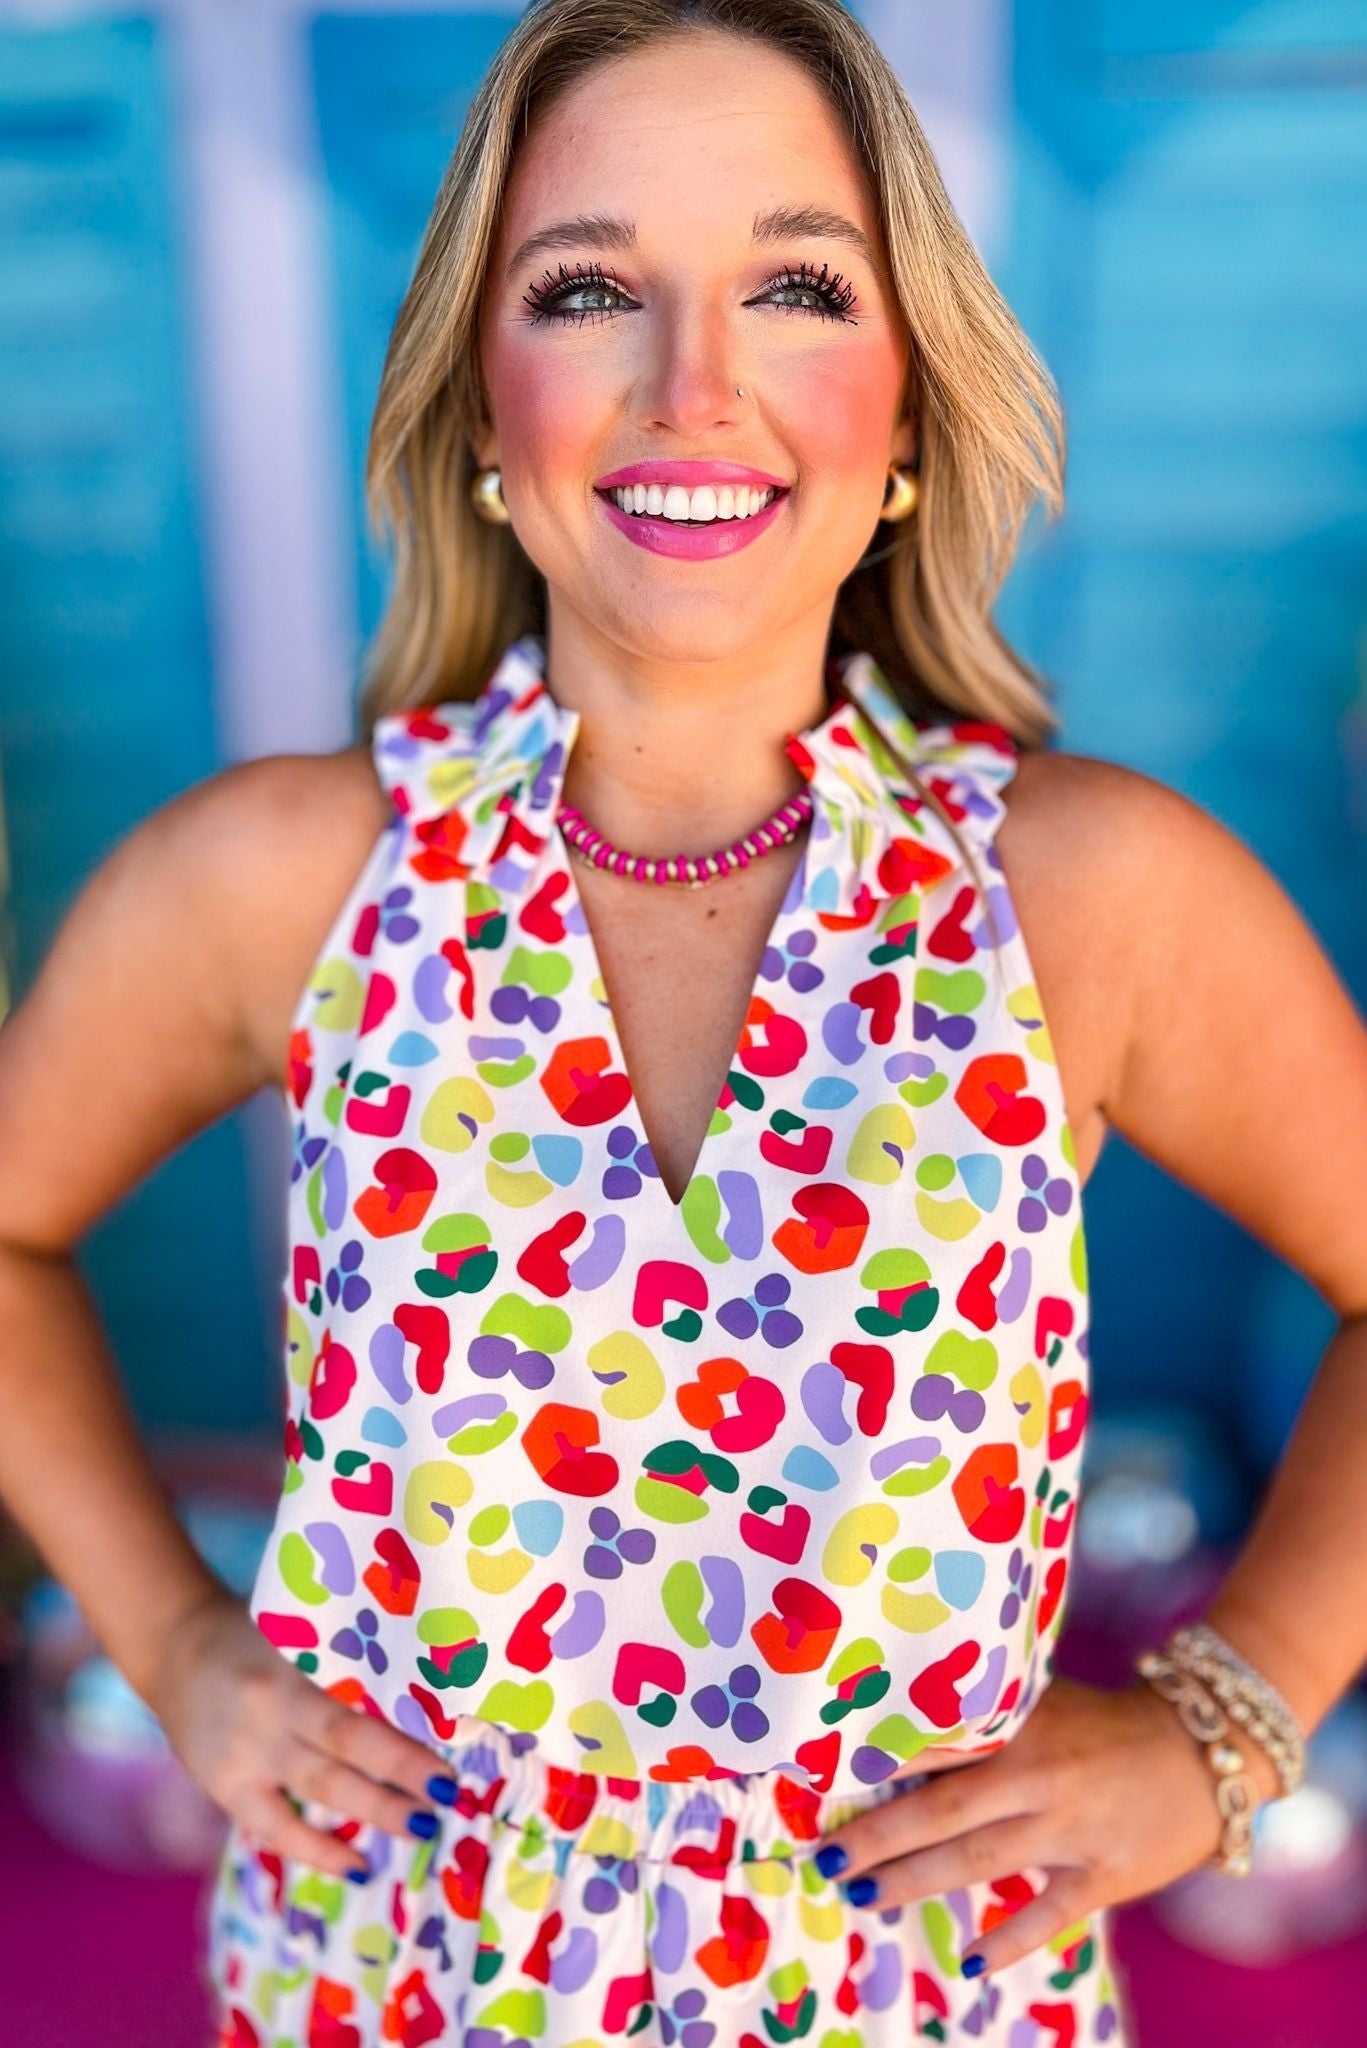 SSYS The Margot Sleeveless Top In Animal, ssys the label, spring break top, spring break style, spring fashion affordable fashion, elevated style, bright style, printed top, mom style, shop style your senses by mallory fitzsimmons, ssys by mallory fitzsimmons